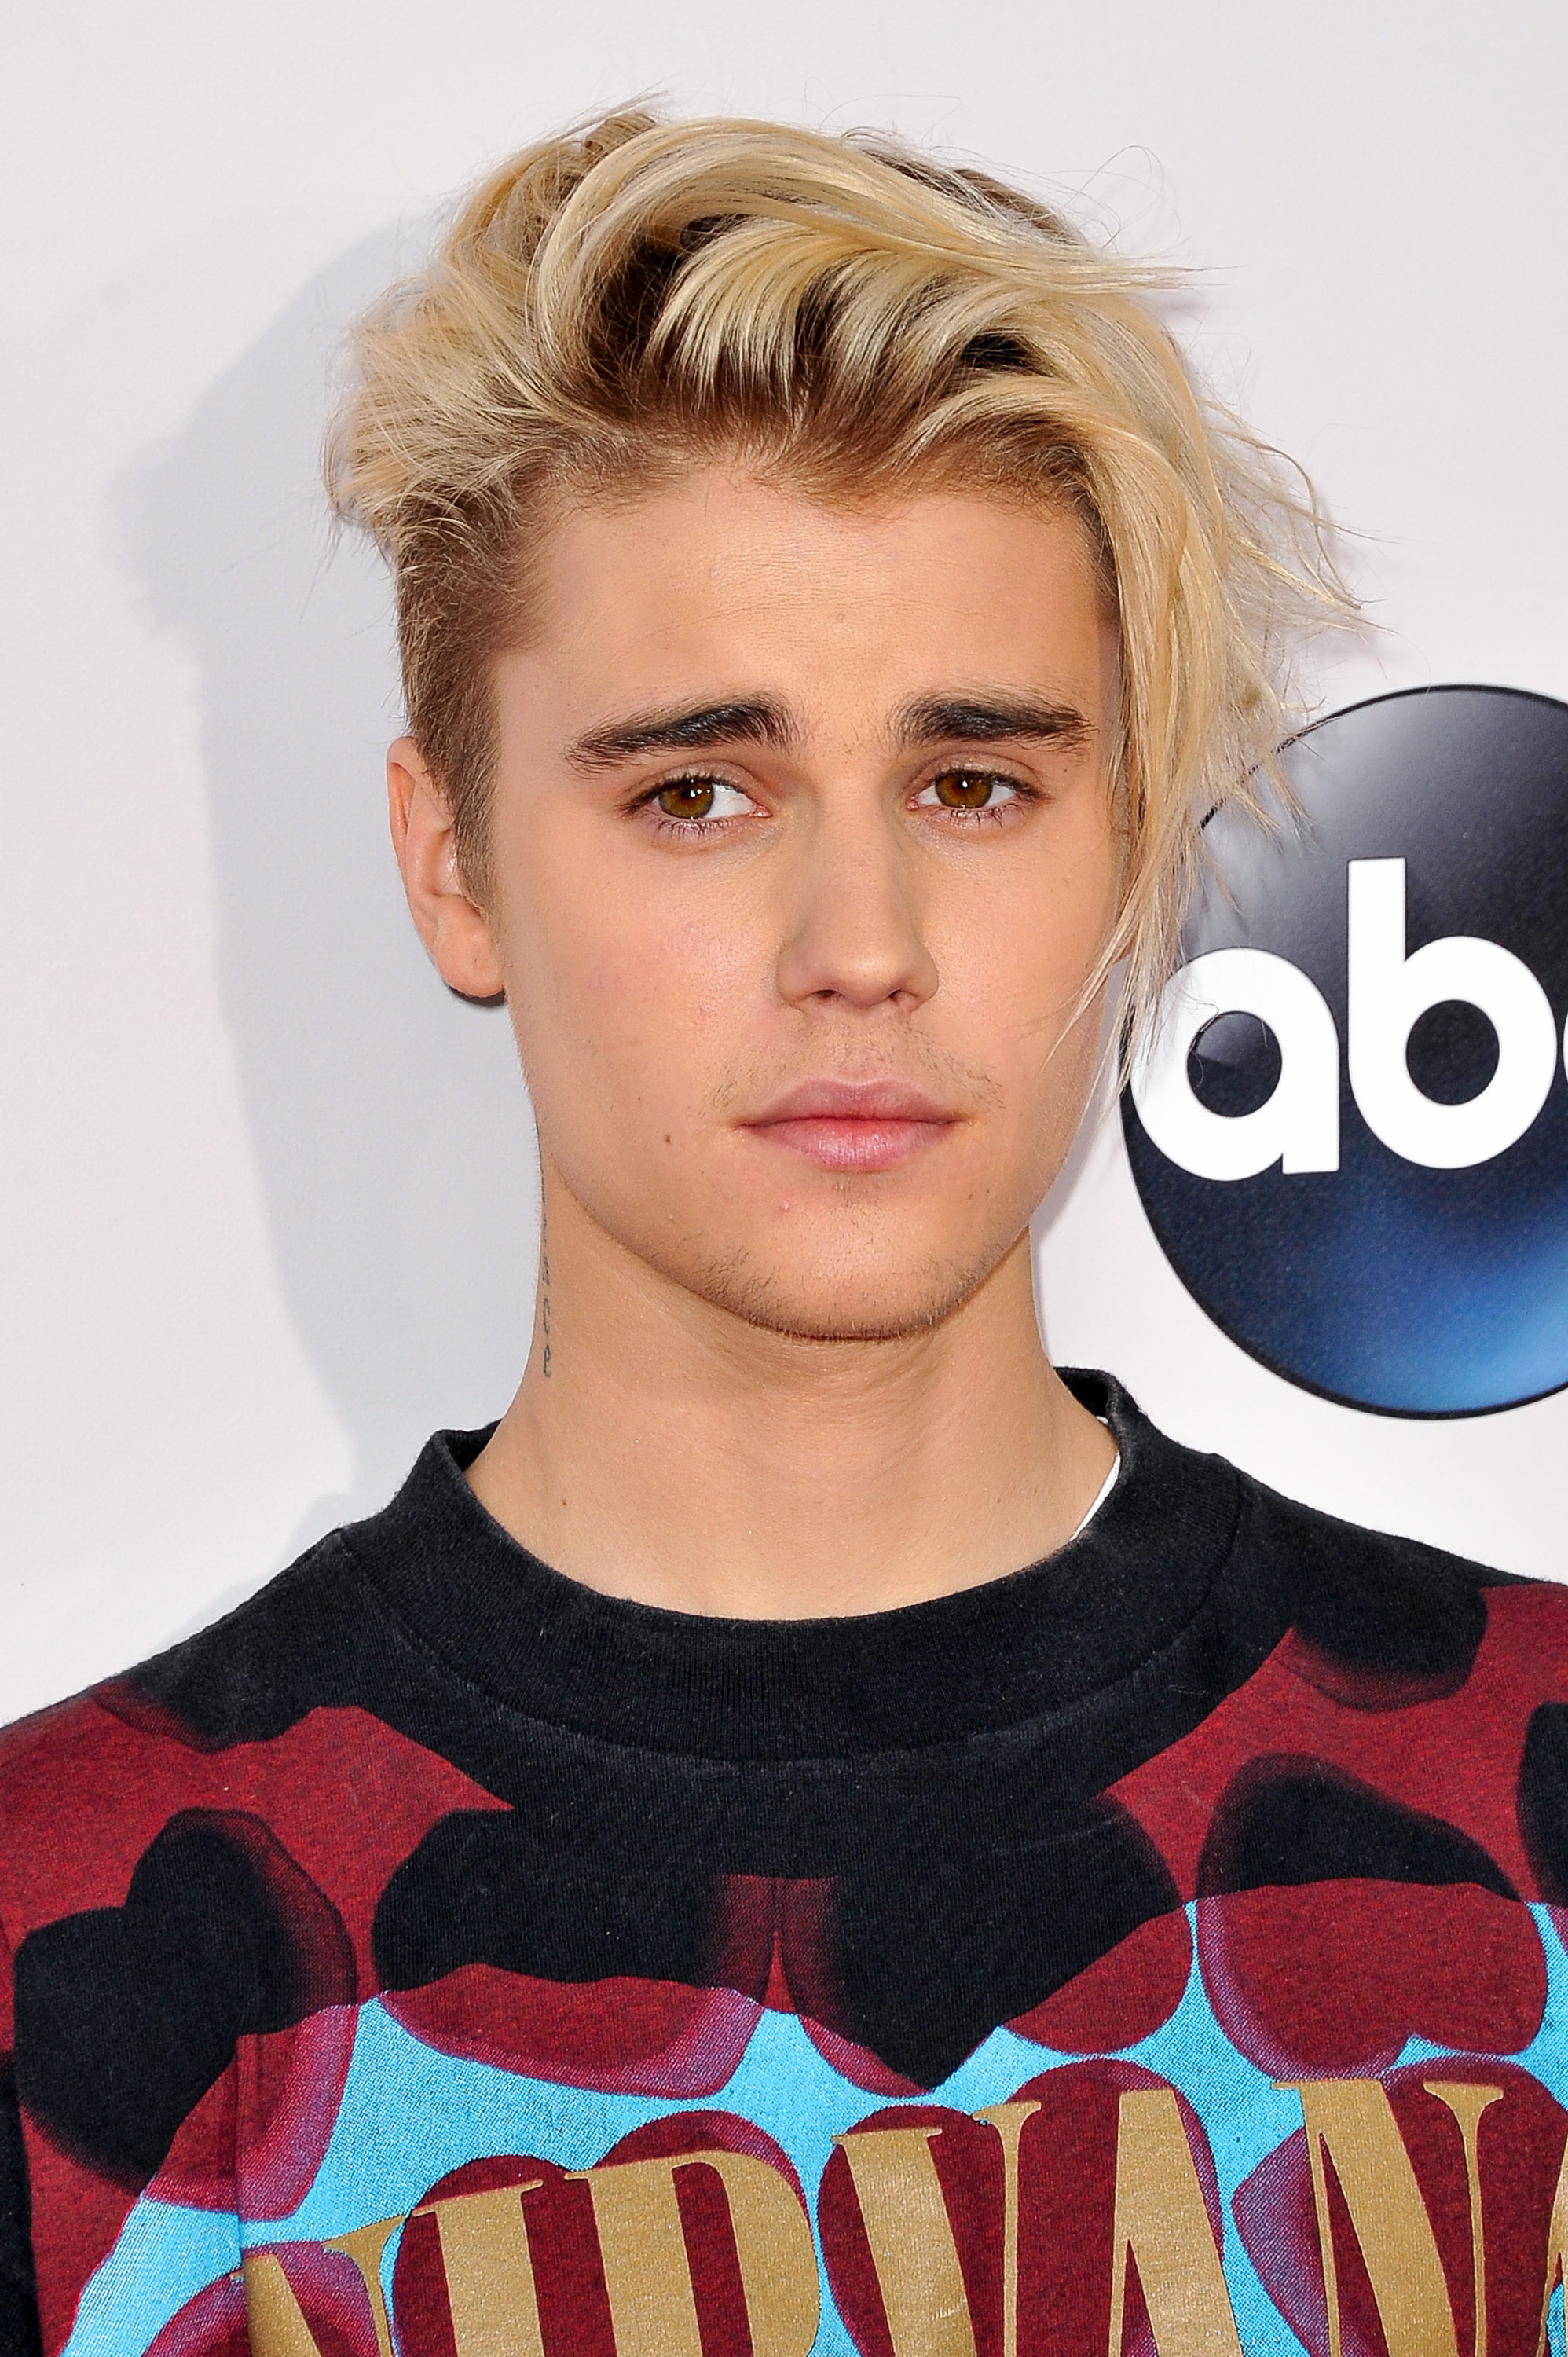 Singer Justin Bieber arrives at the 2015 American Music Awards at Microsoft Theater on November 22, 2015 in Los Angeles, California.